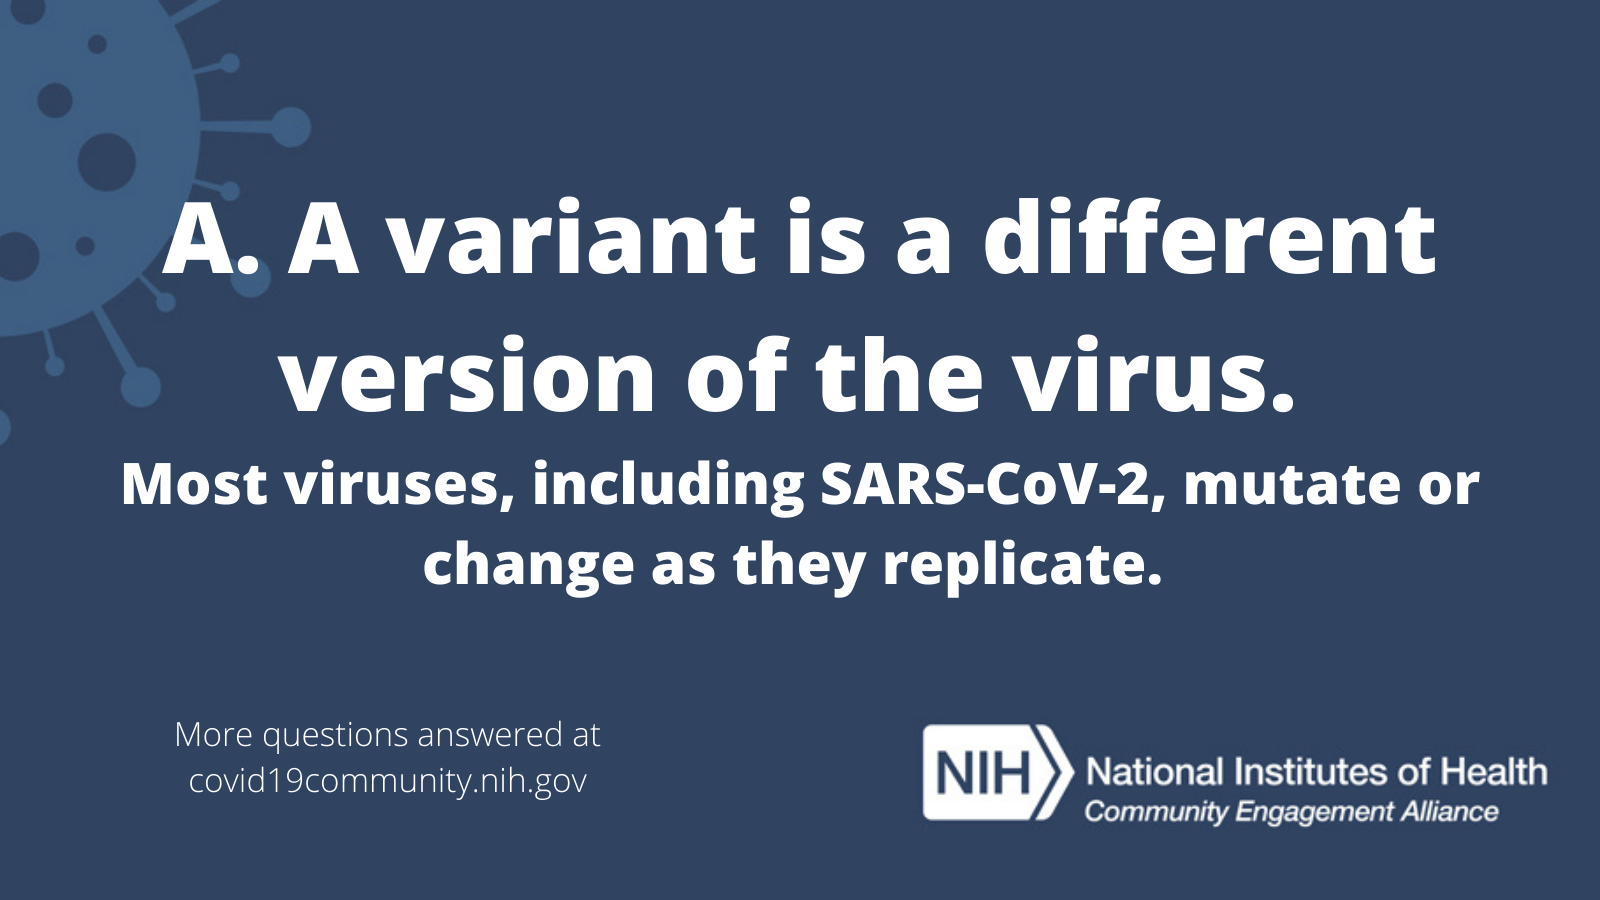 A. A variant is a different version of the virus. Most viruses, including SARS-CoV-2, mutate or change as they replicate. More vaccine questions answered at covid19community.nih.gov